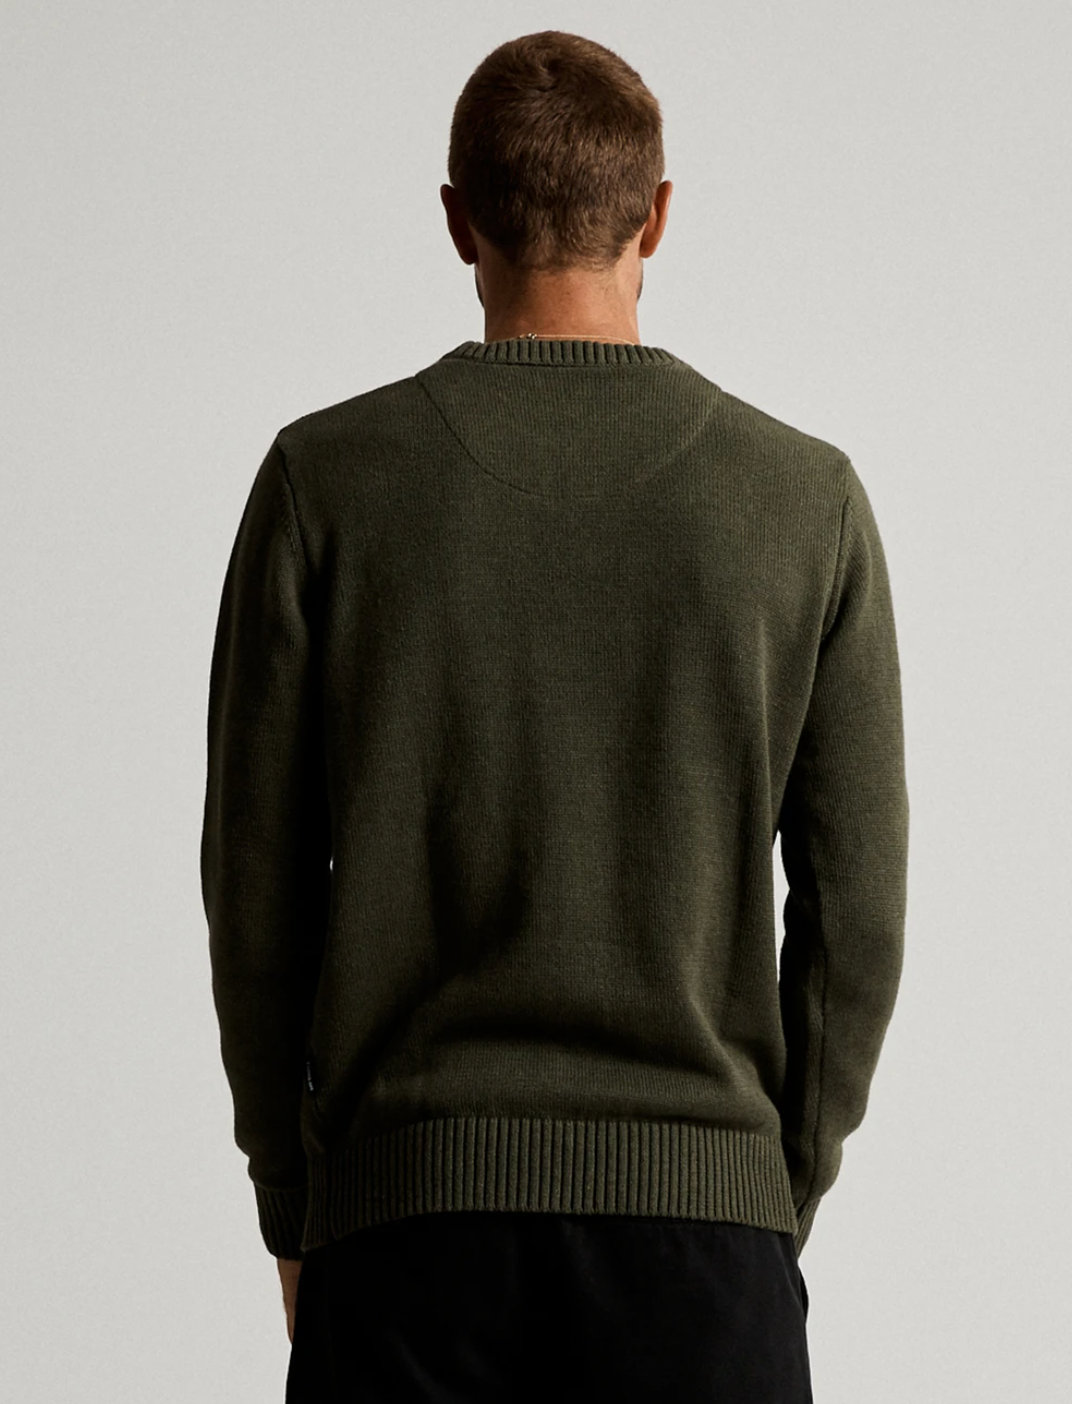 Mr Simple - Standard Knit / Army | Buster McGee Daylesford